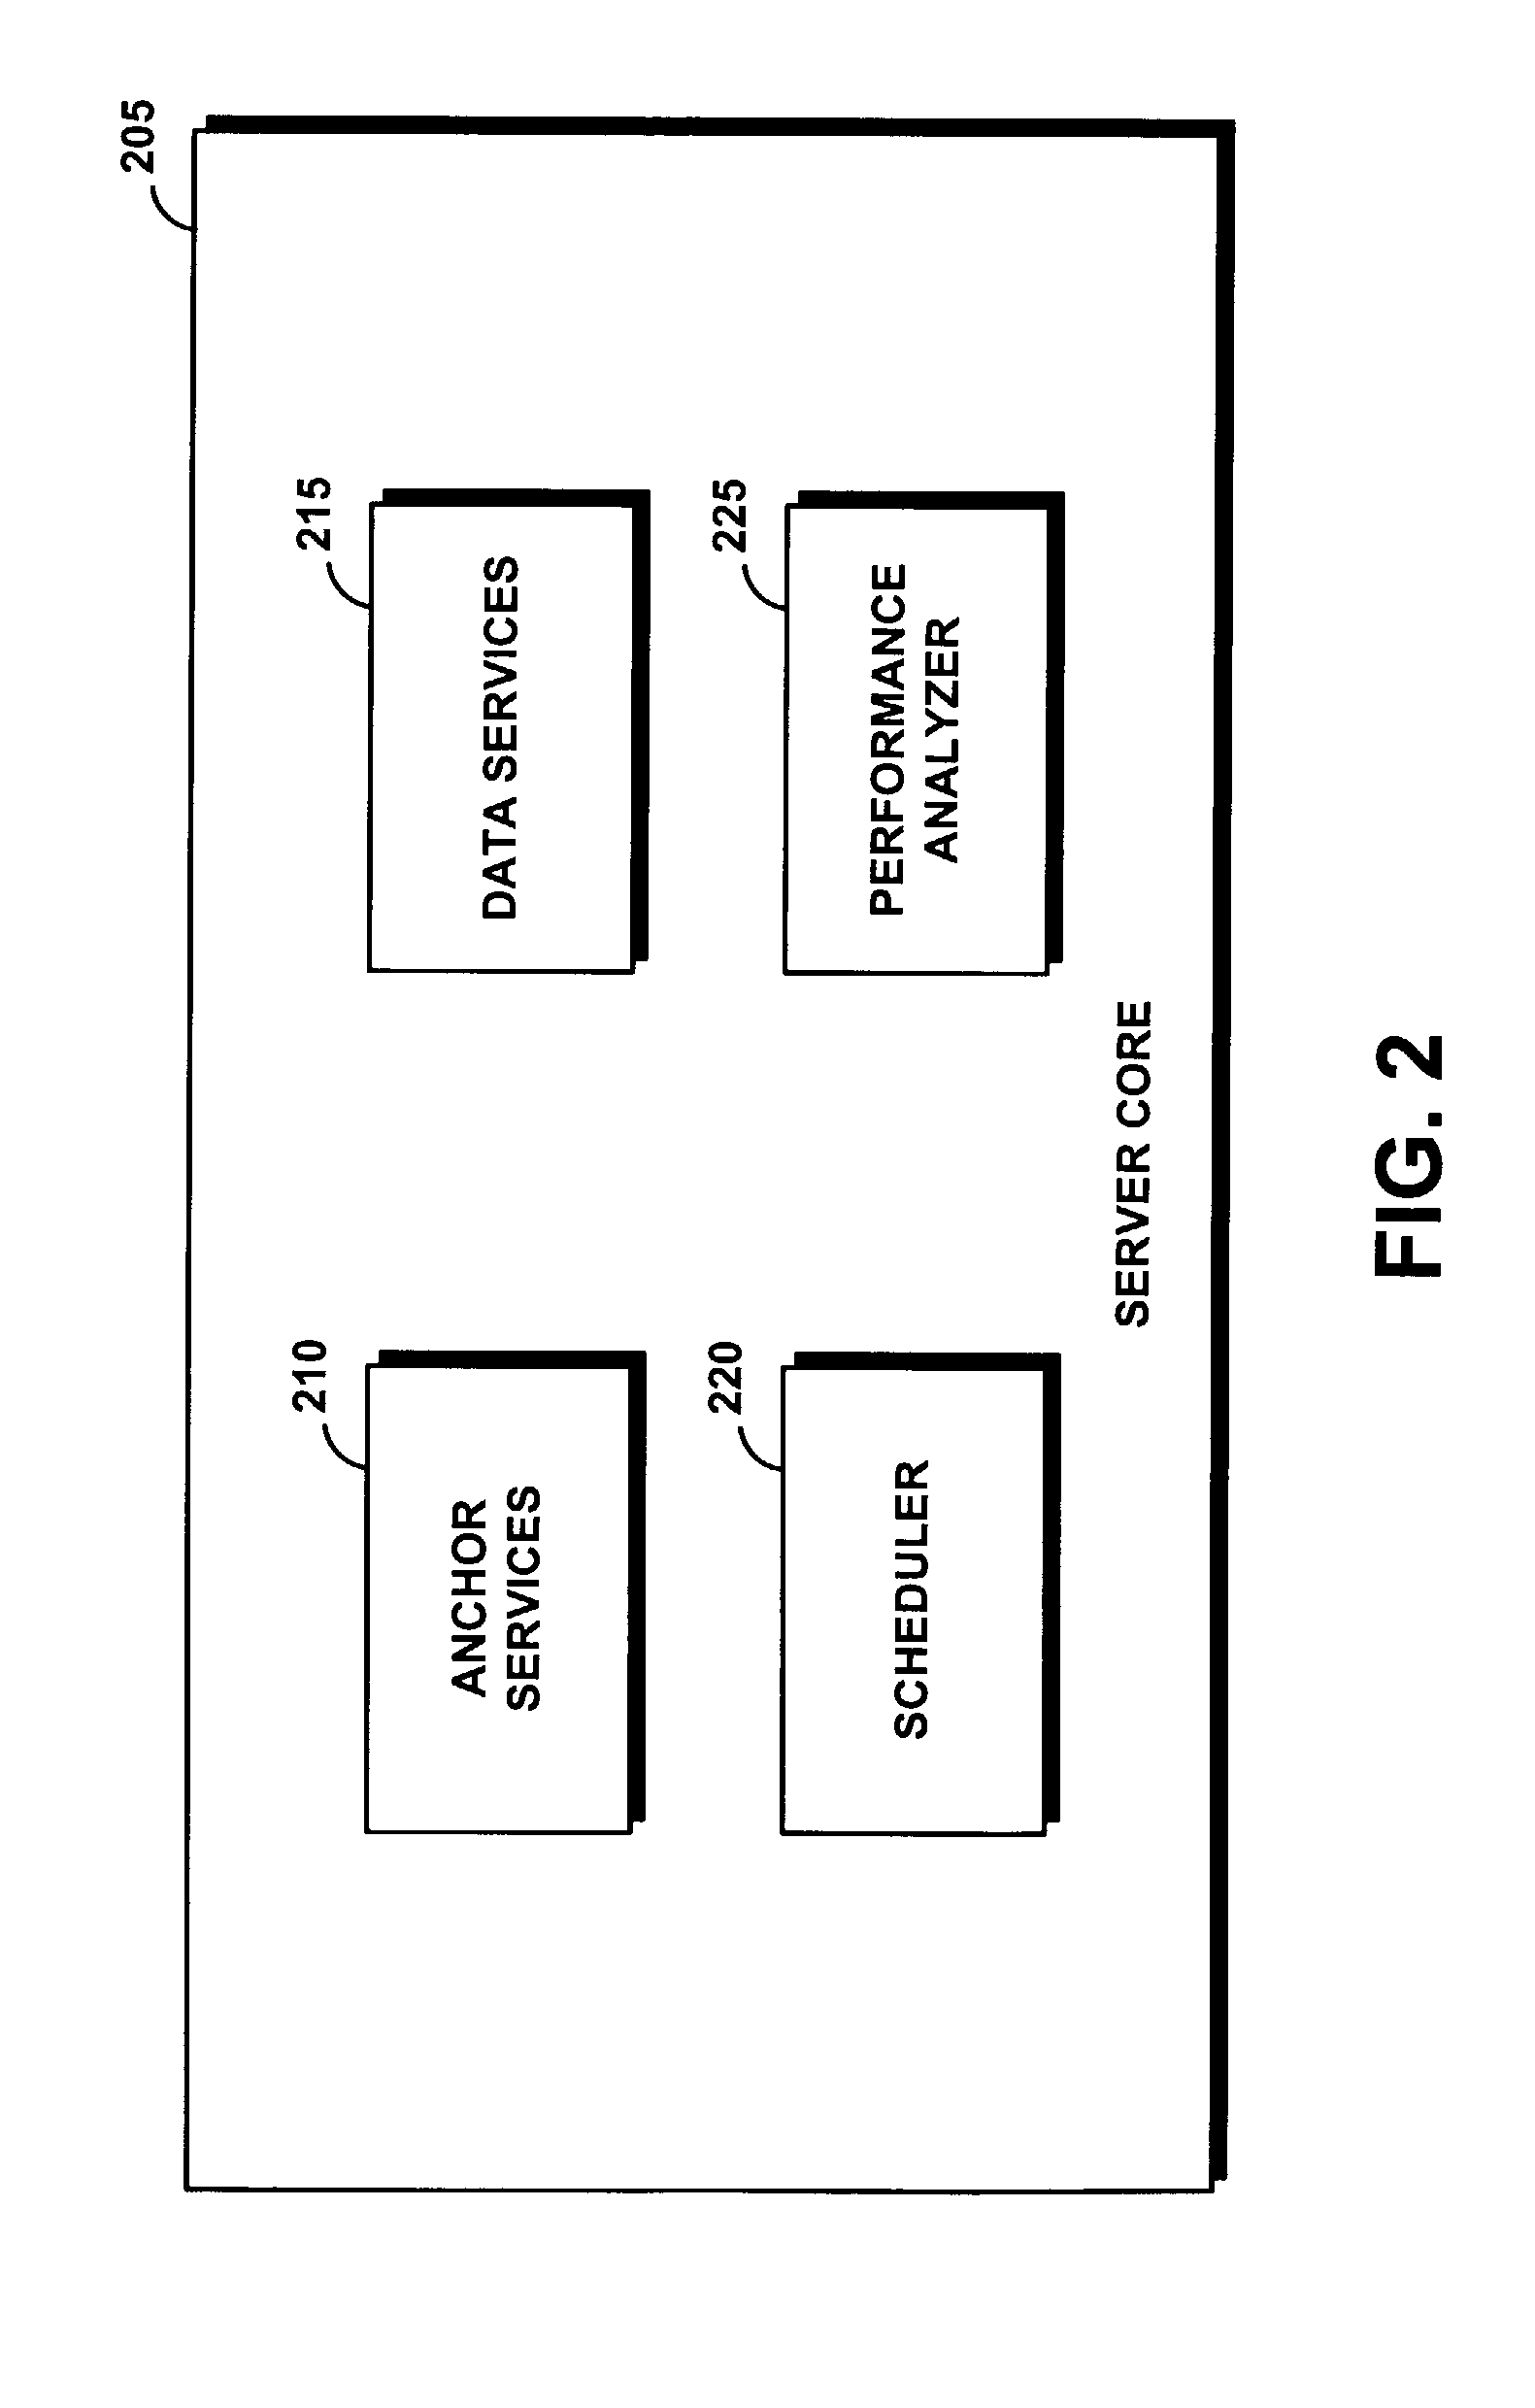 System and method for utilizing informed throttling to guarantee quality of service to I/O streams